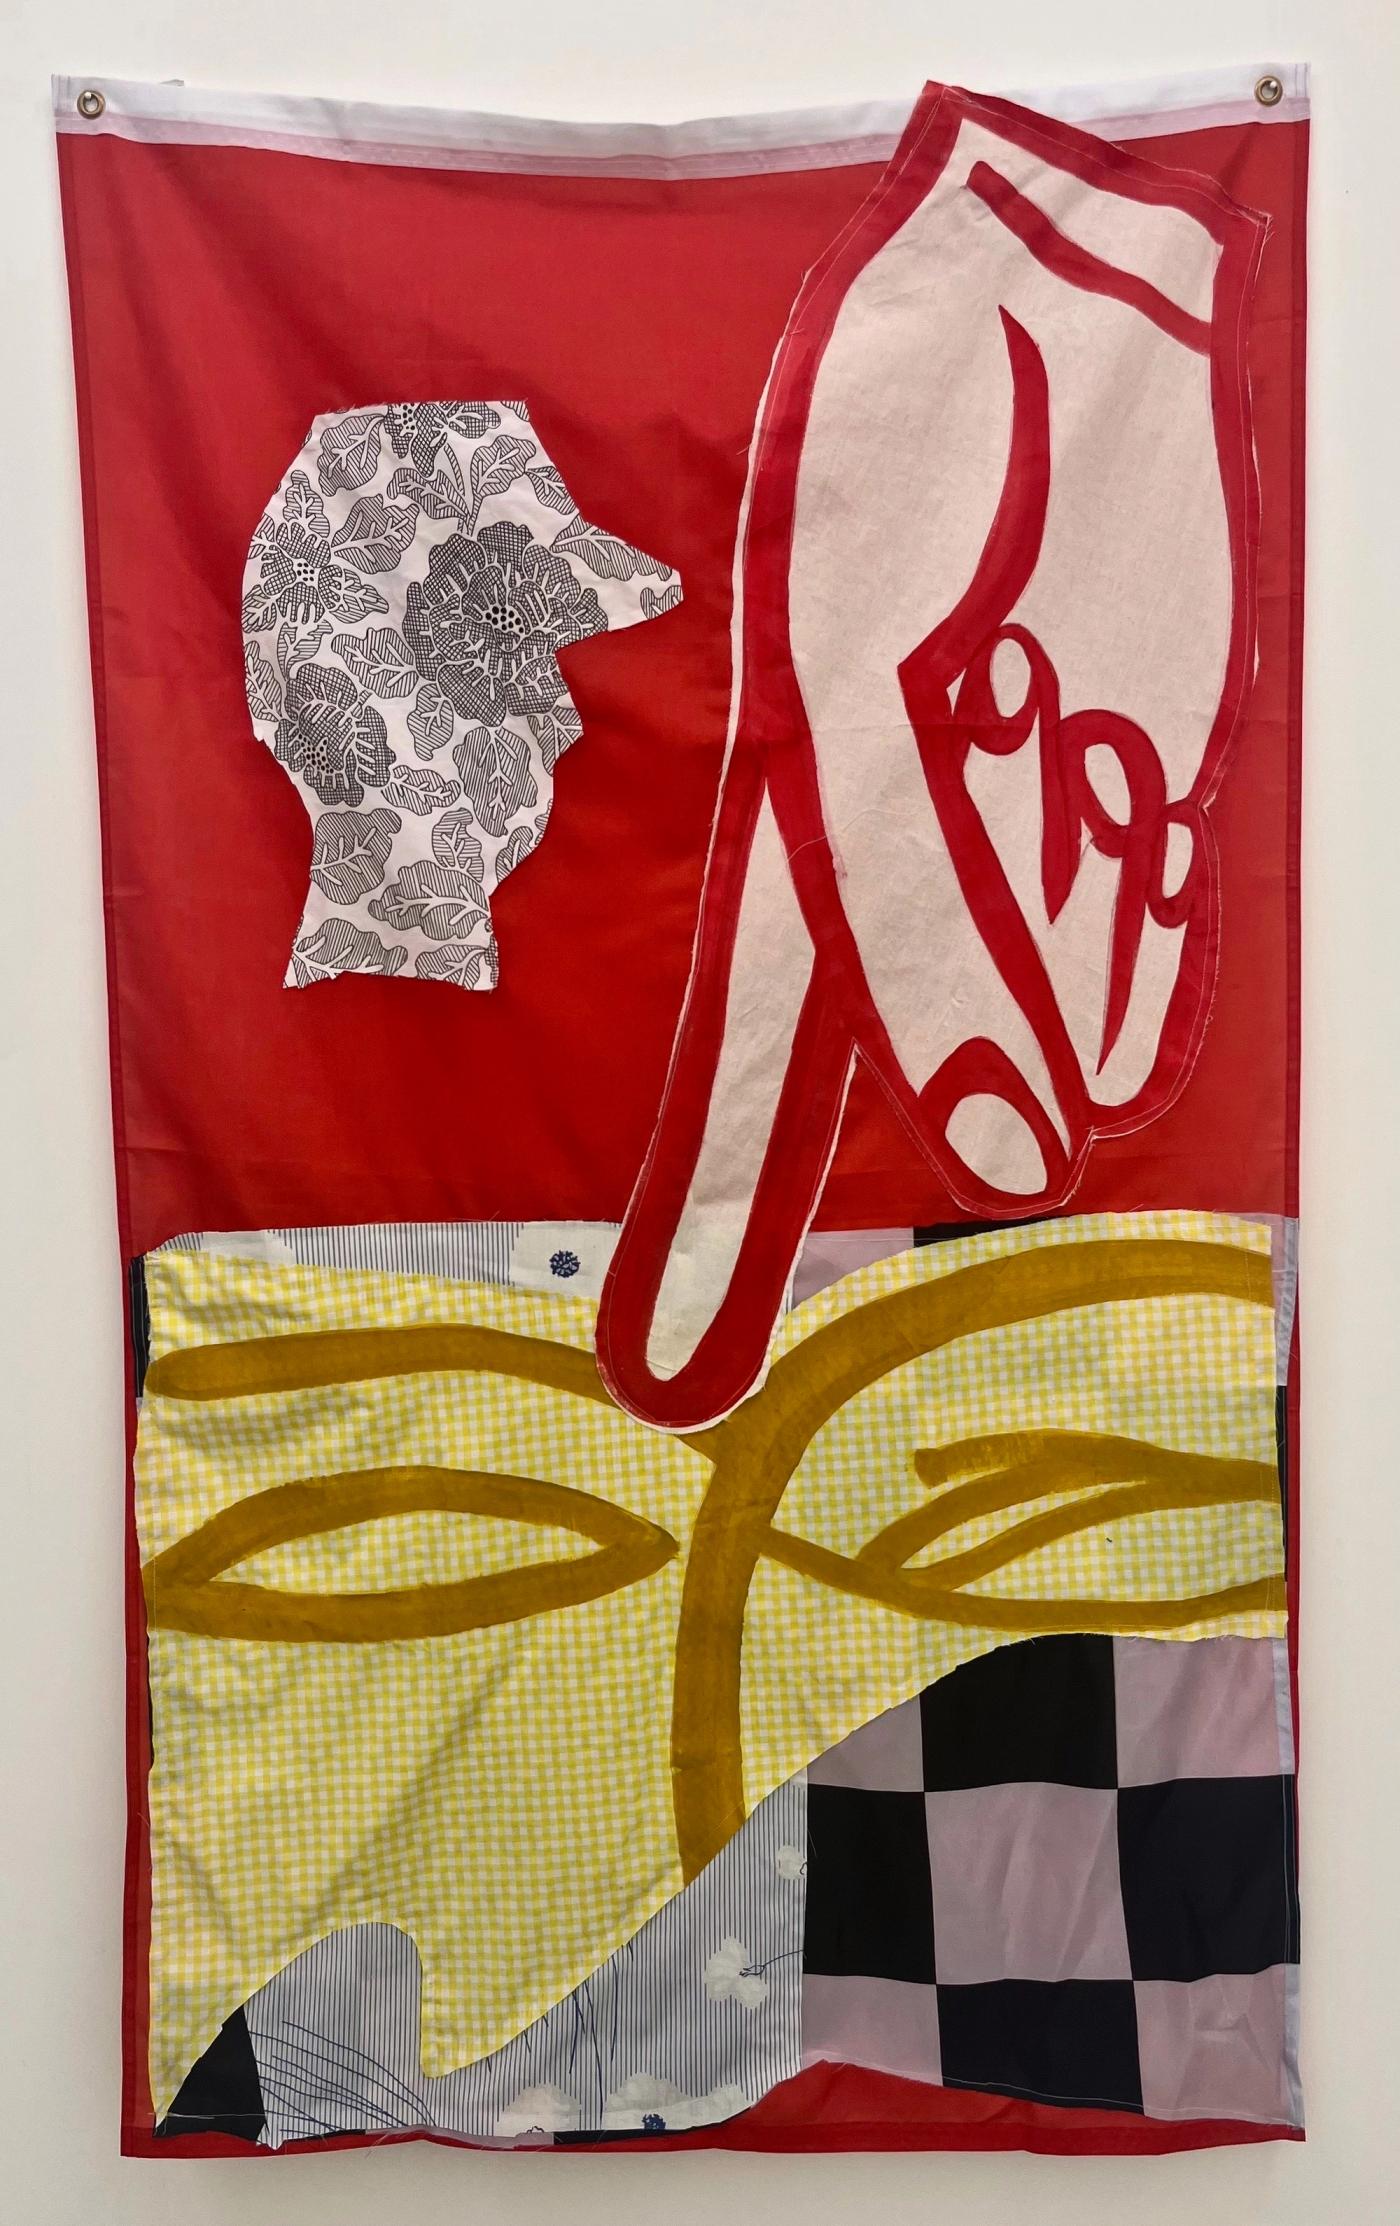 Image of Untitled (Seeing), 2022: Fabric and paint on flag